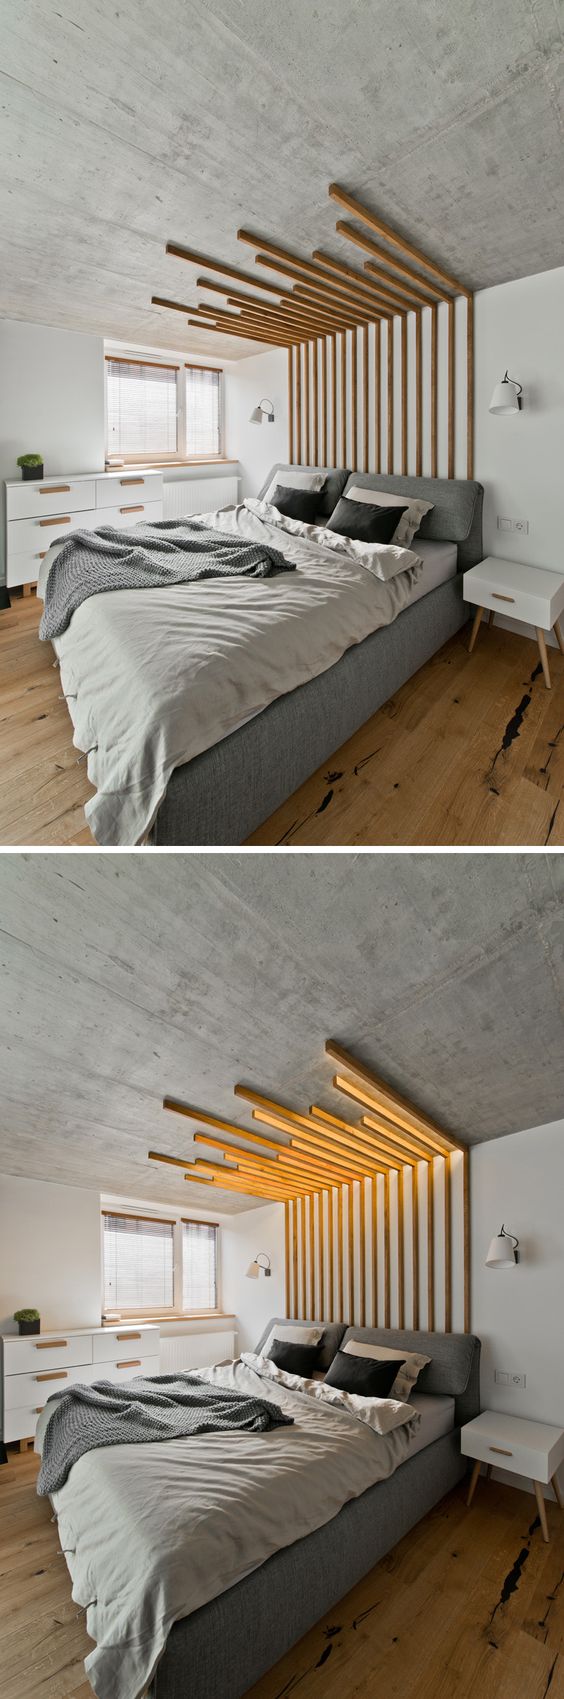 Interior architect, Indre Sunklodiene of InArch, has designed this decorative wood feature piece above the bed, in a loft in Vilnius, Lithuania. It not only creates a focal point within the bedroom, but is also functional, as it includes lighting.